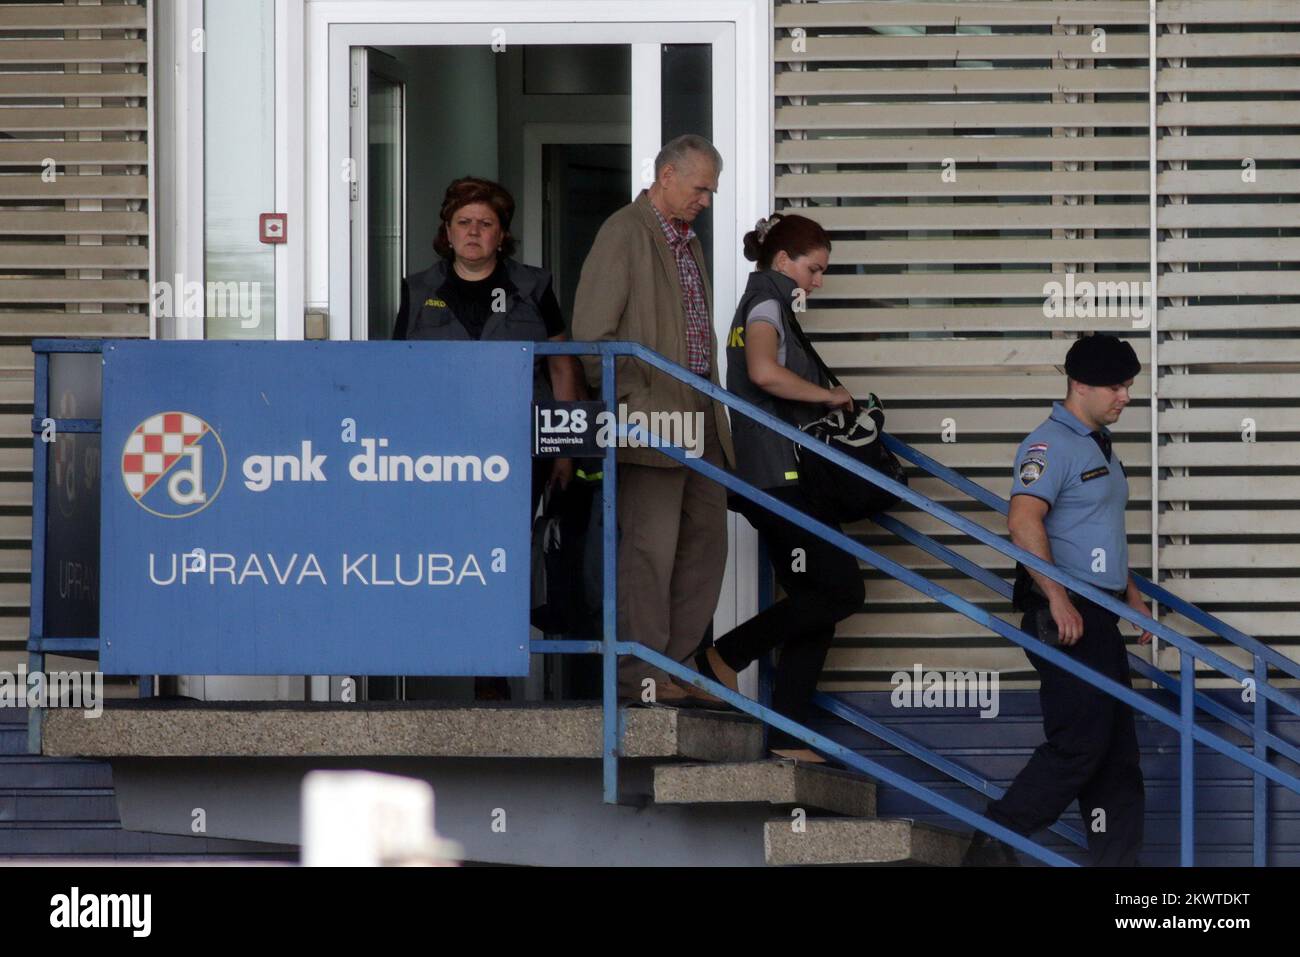 The employees of the Croatian agency fighting corruption and organized crime leaving the Administration of GNK Dinamo. Croatian police on Thursday raided the homes of brothers Zdravko and Zoran Mamic, officials of the nation's largest club Dinamo Zagreb and the most powerful people in the country's football. The search has been ordered by the Croatian agency fighting corruption and organized crime (Uskok) in connection with tax evasion suspicions, the Mamics confirmed in a statement released by Dinamo.   Stock Photo